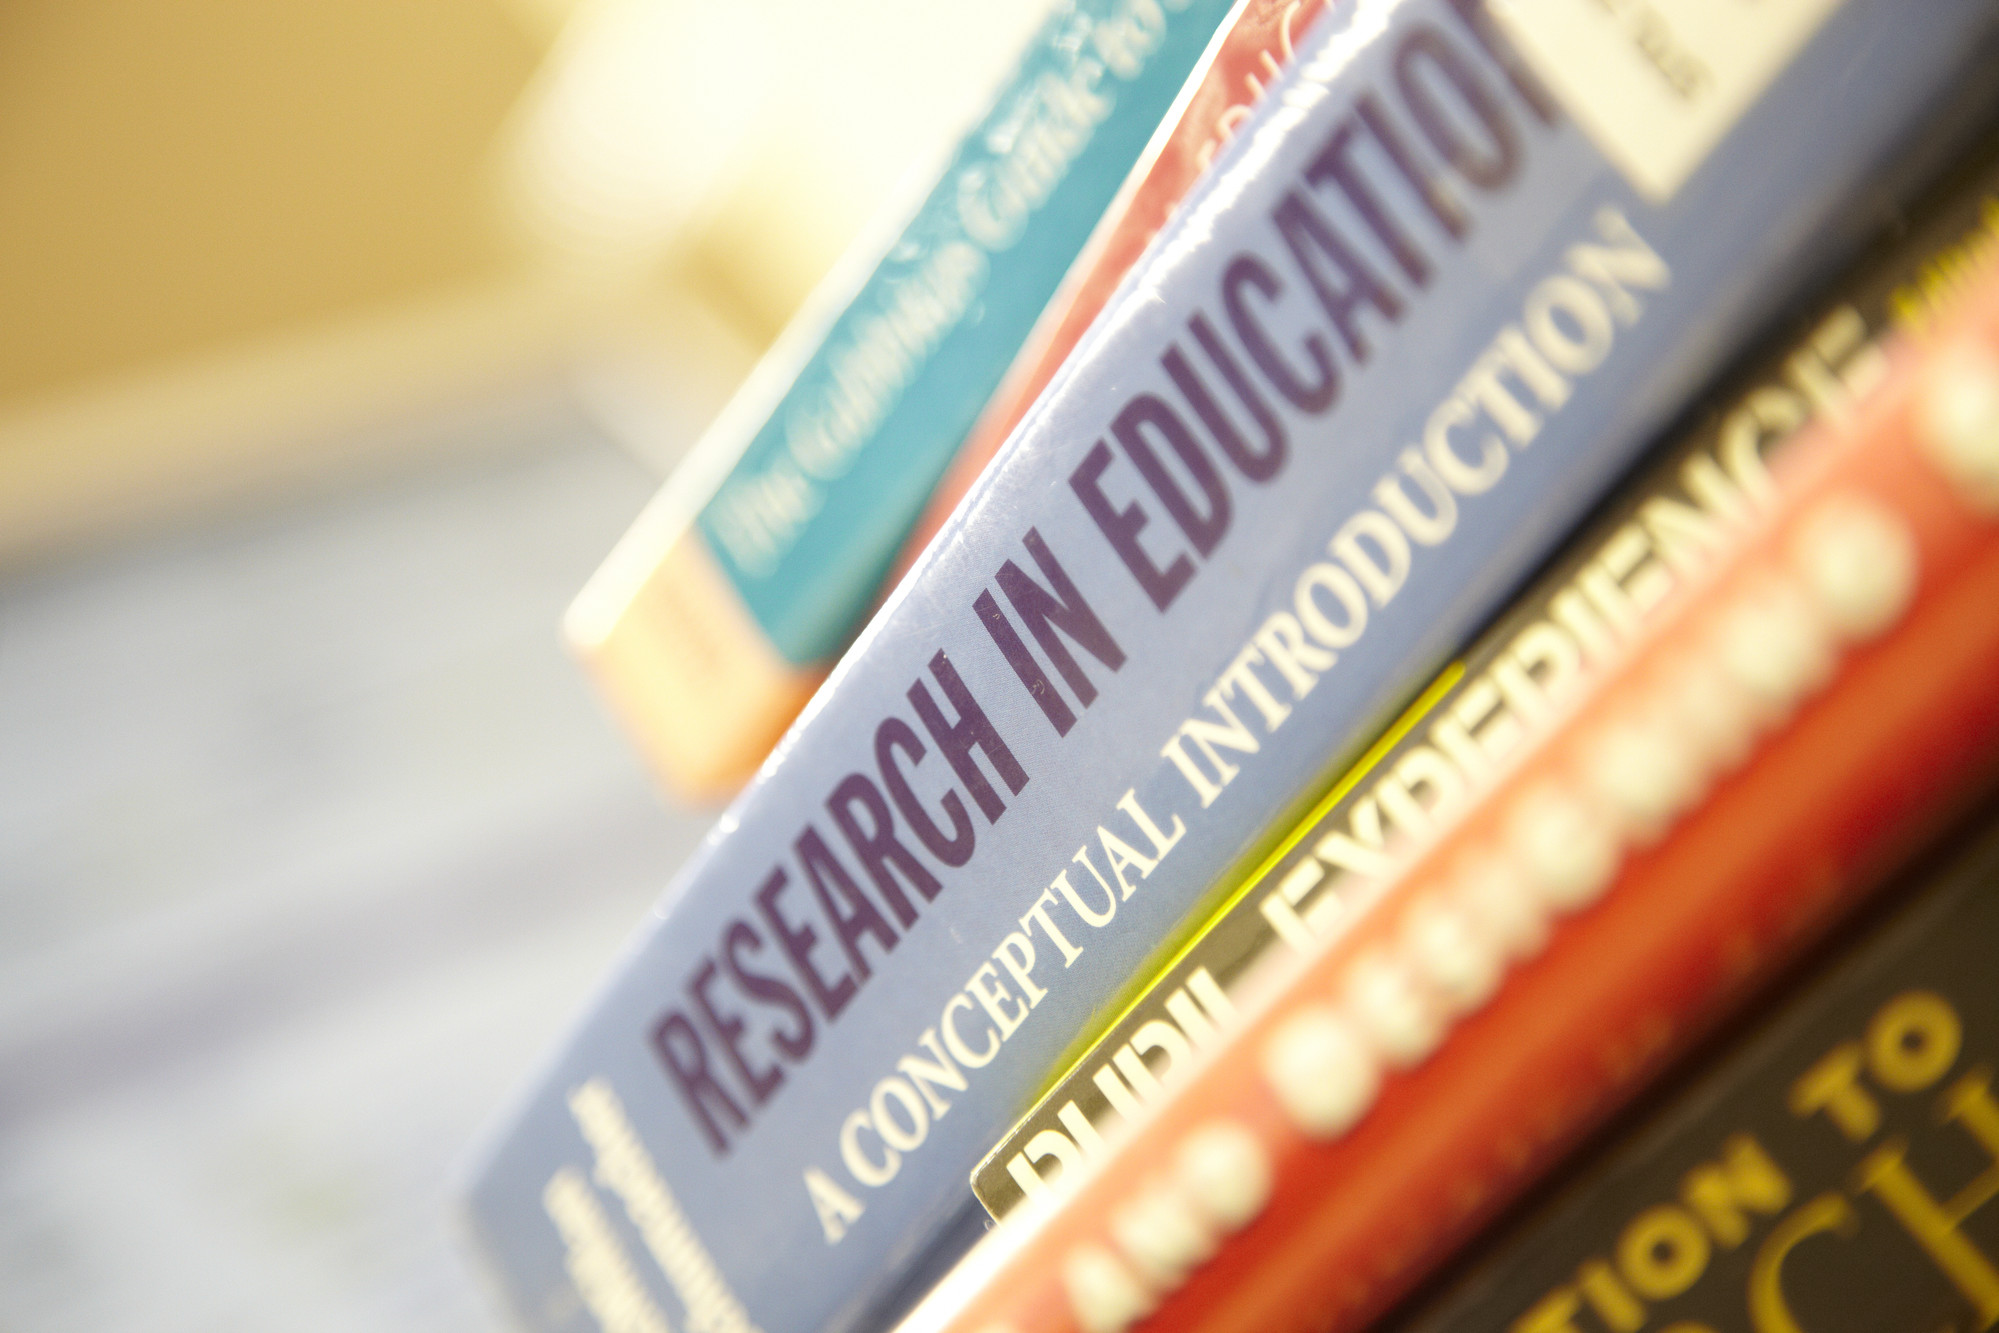 Stack of Education books